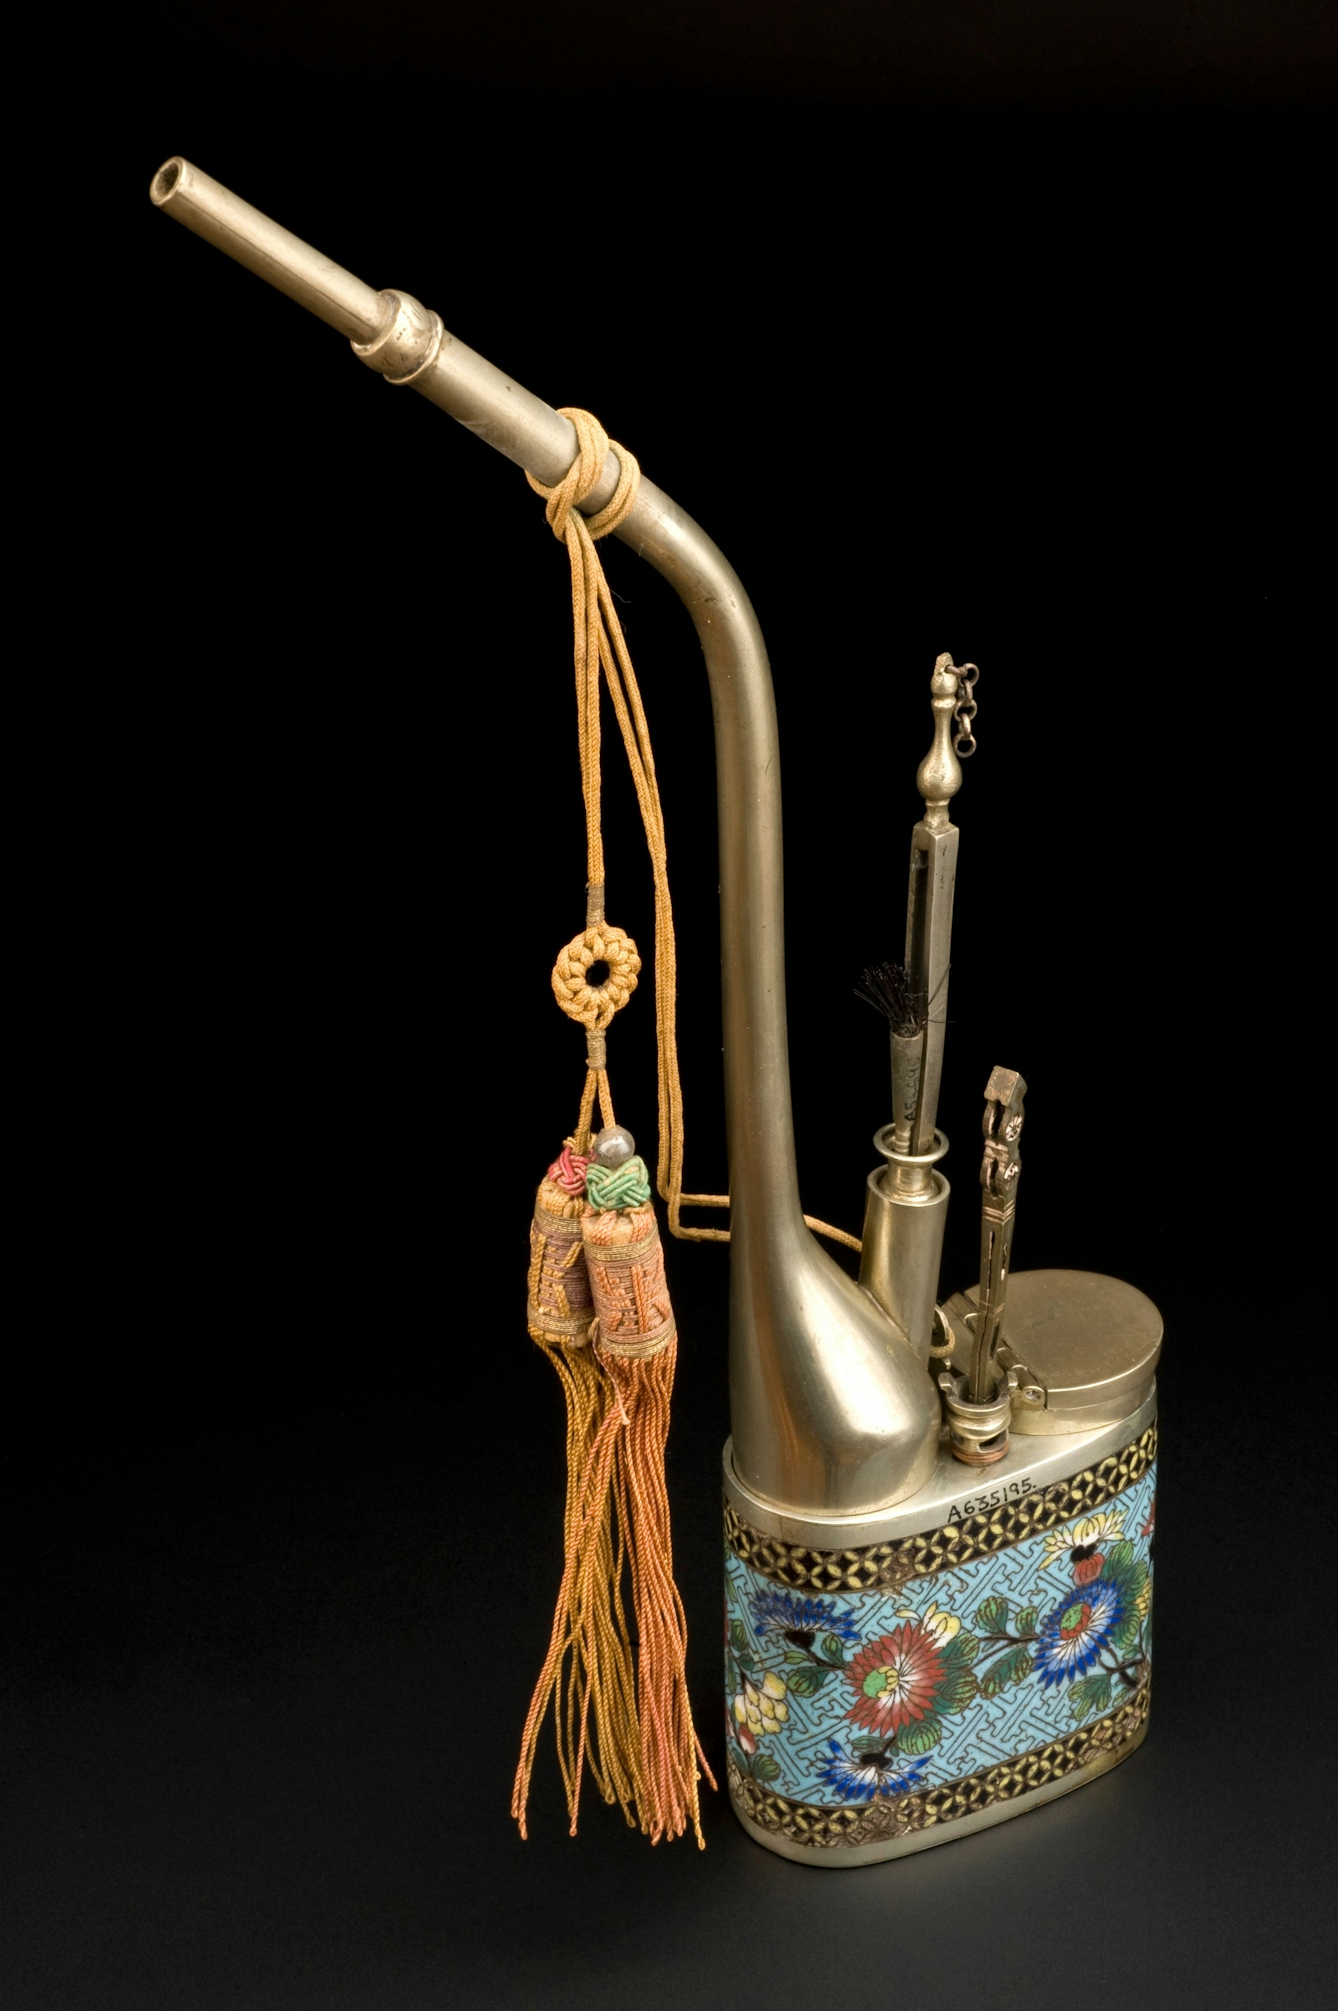 Ornate metal pipe with enamel flower decoration on the main well and a hinged lid.